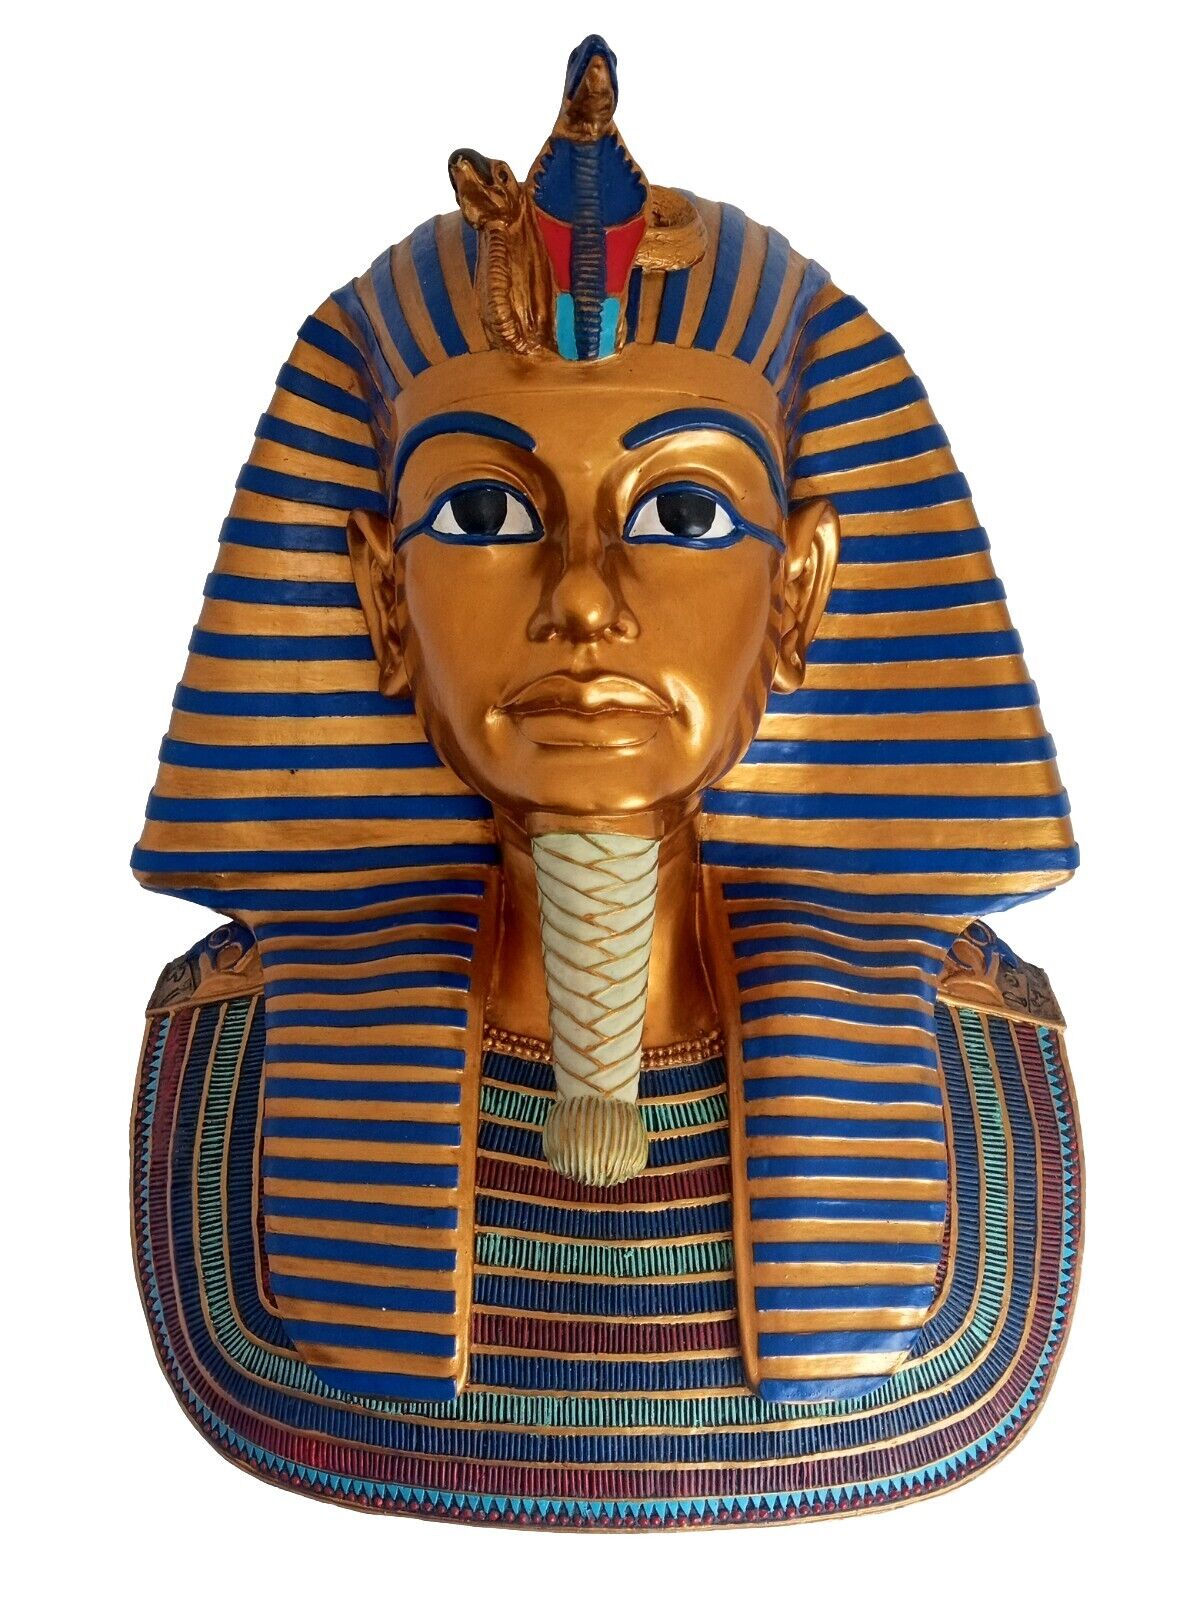 Egyptian Gold Mask of King Tut – A Colorful Collectible Figurine Resin Statue